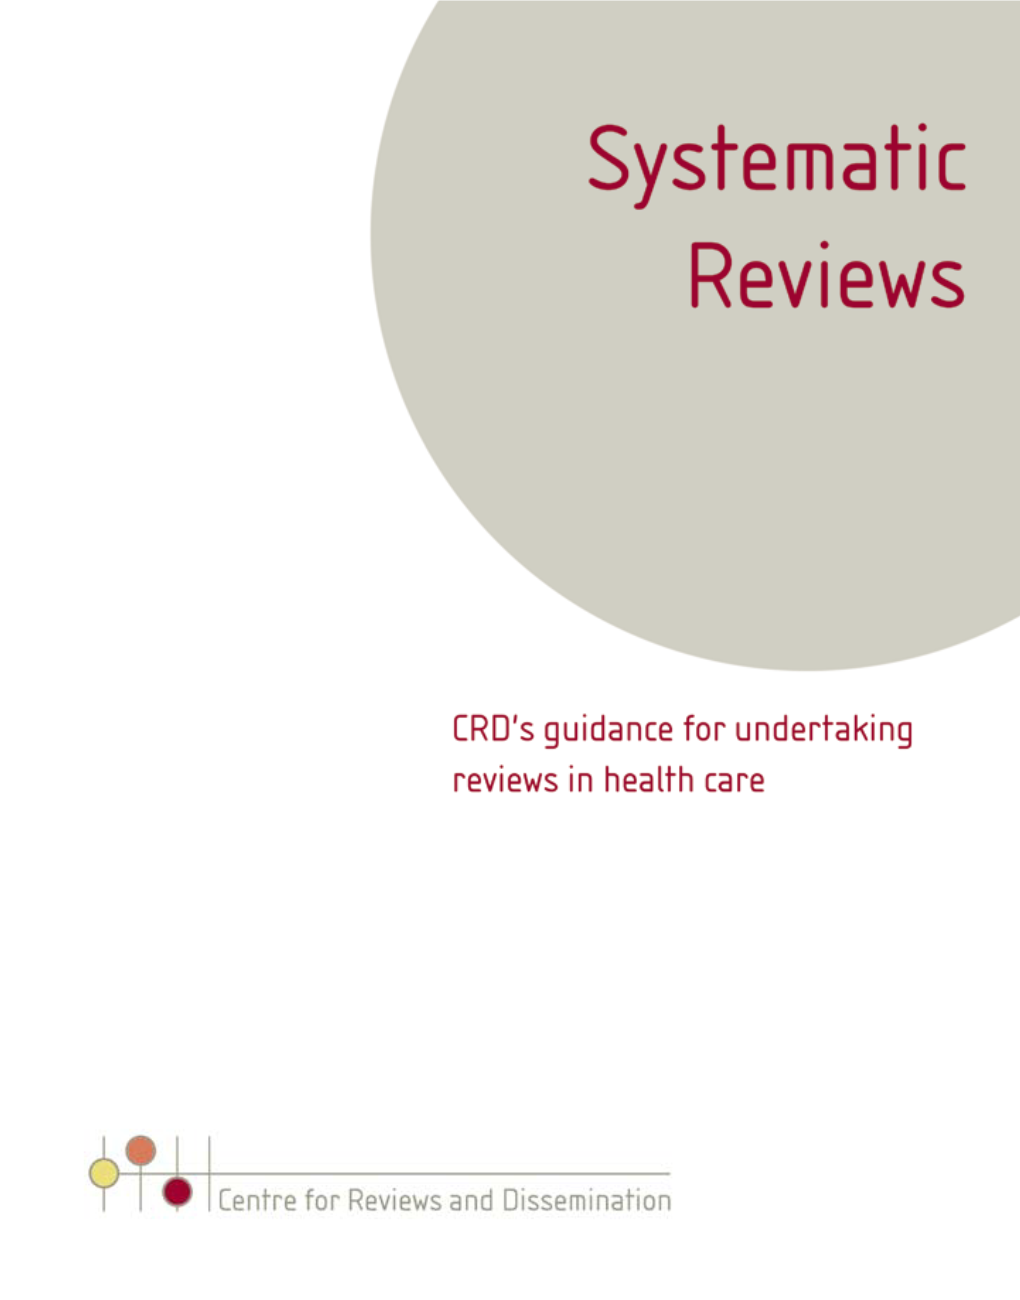 CRD Guidance for Undertaking Systematic Reviews in Health Care